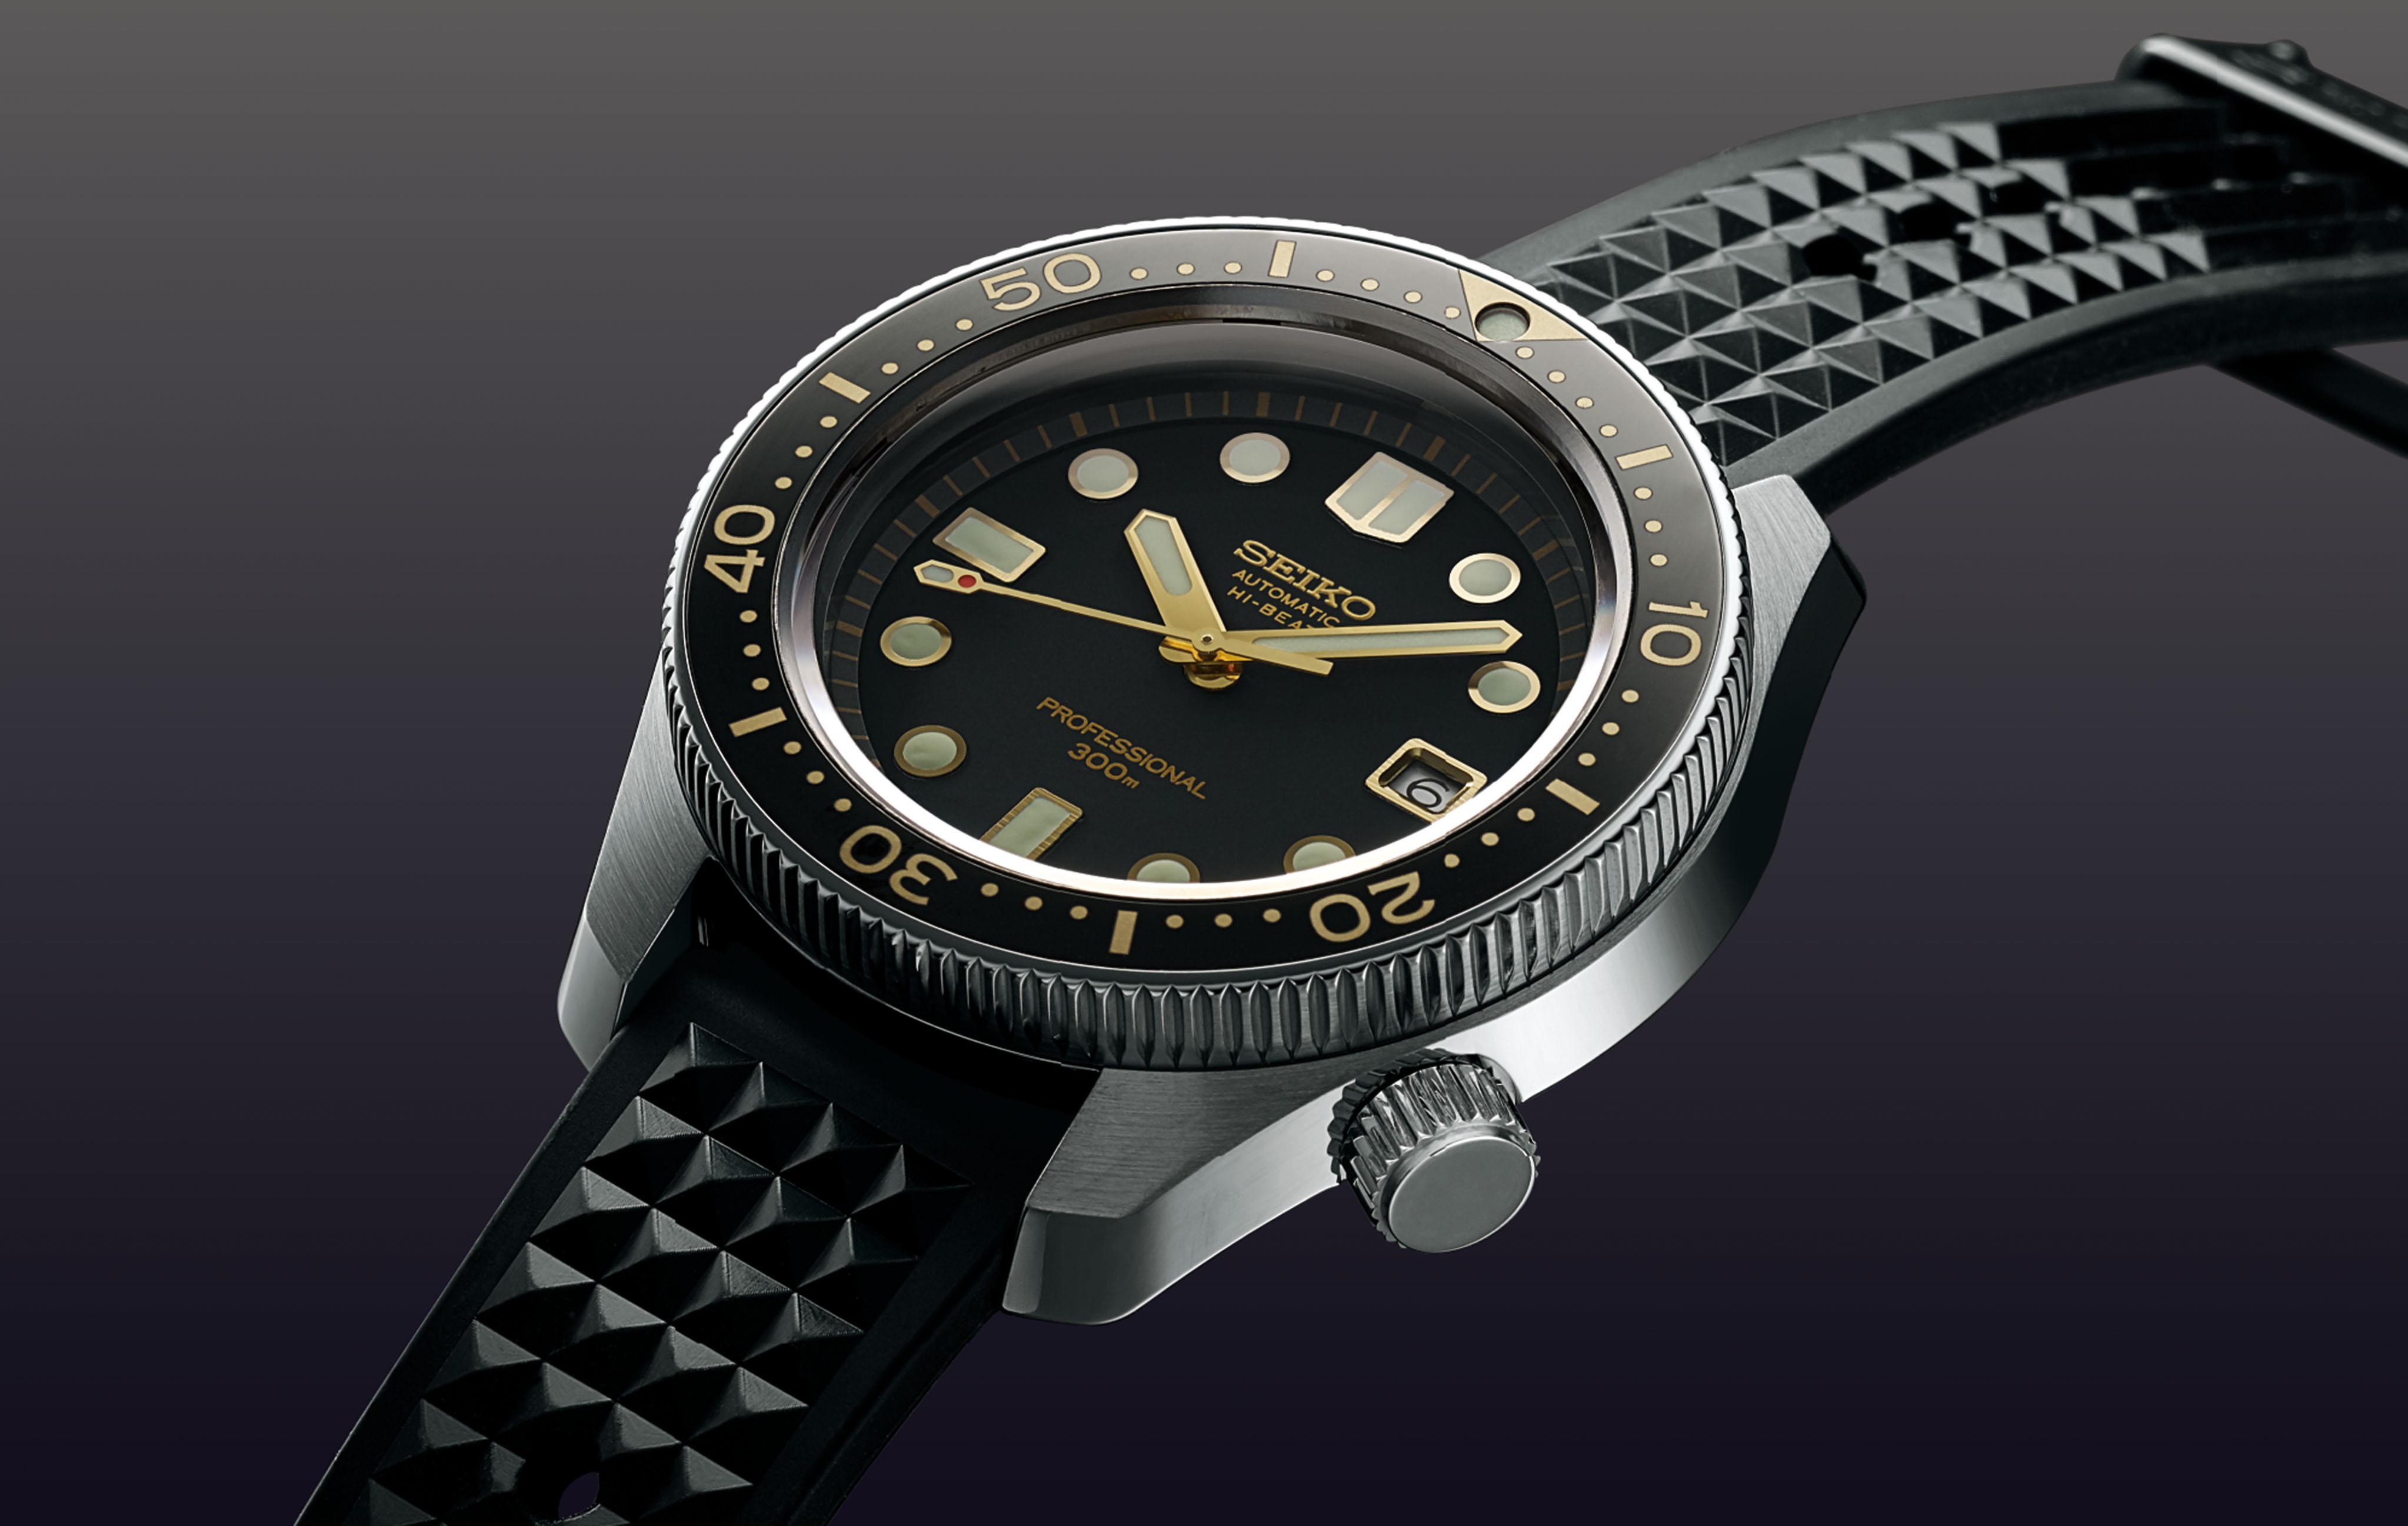 Seiko’s expertise in diver’s watches is celebrated in the new Prospex